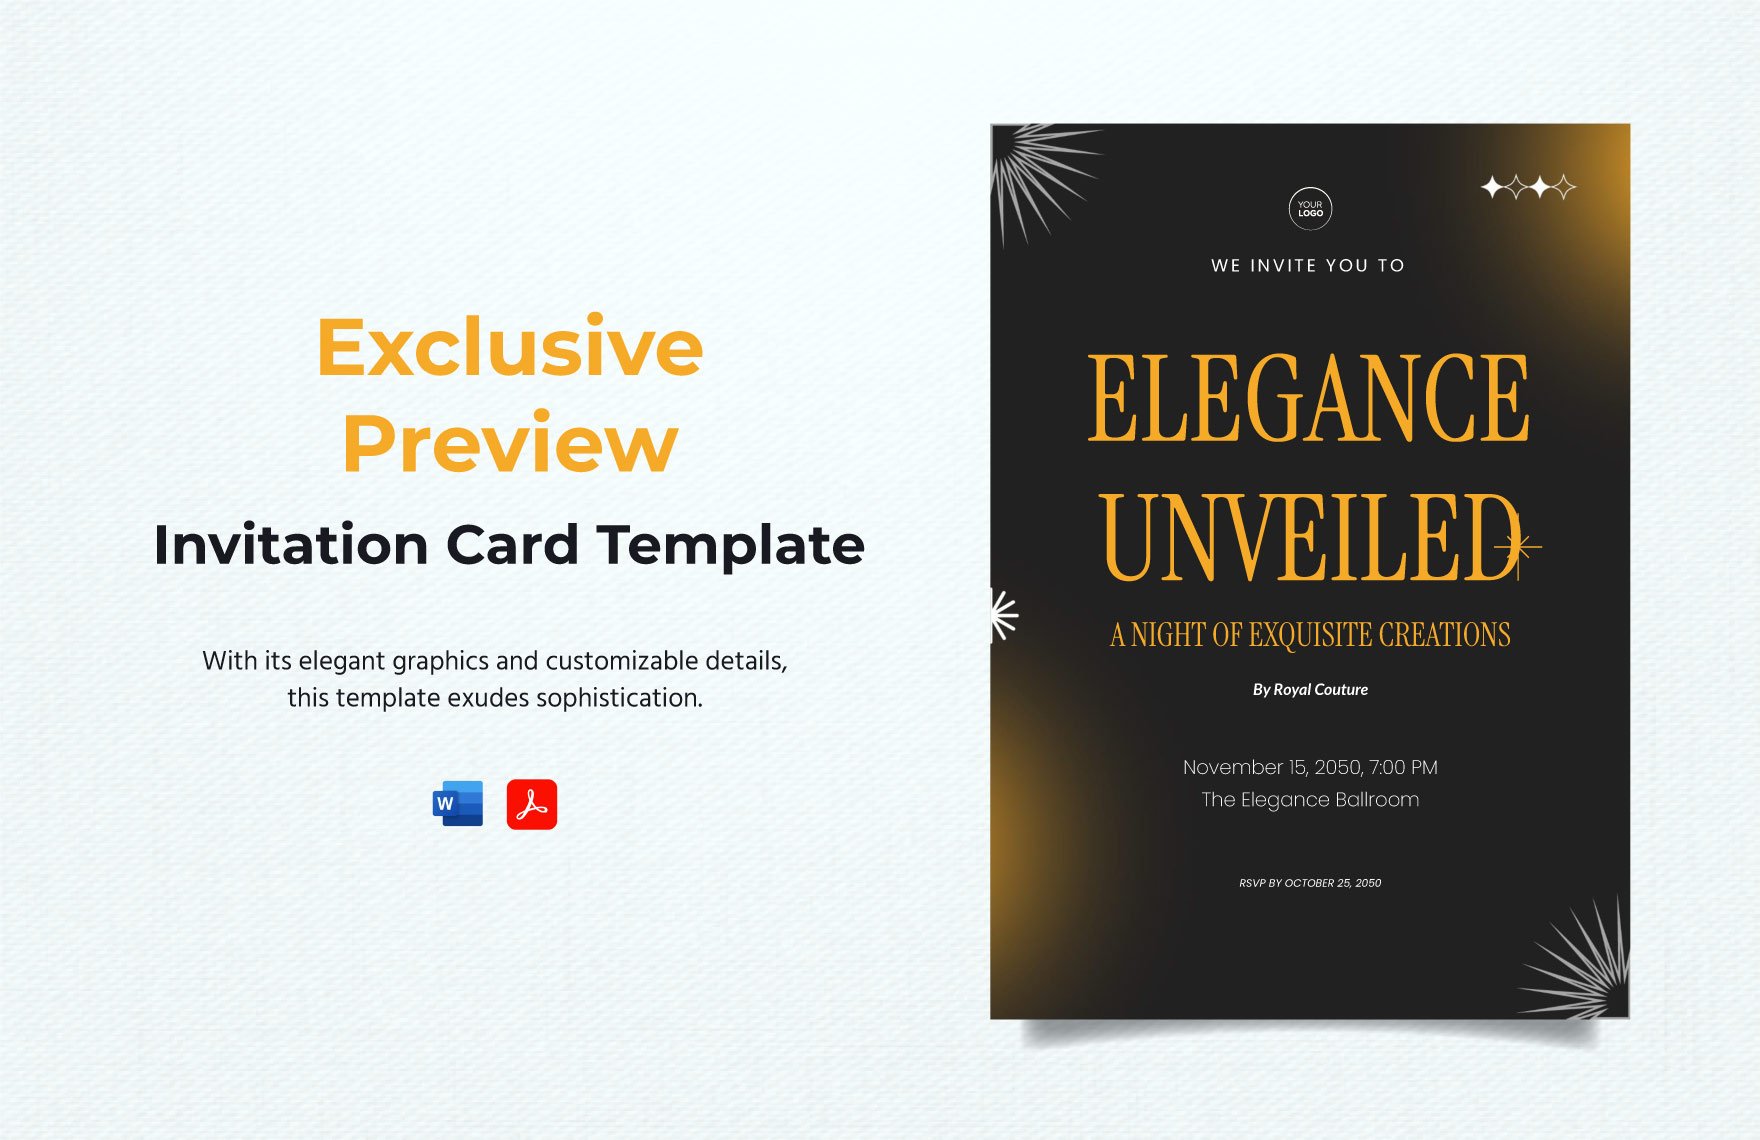 Exclusive Preview Invitation Card Template